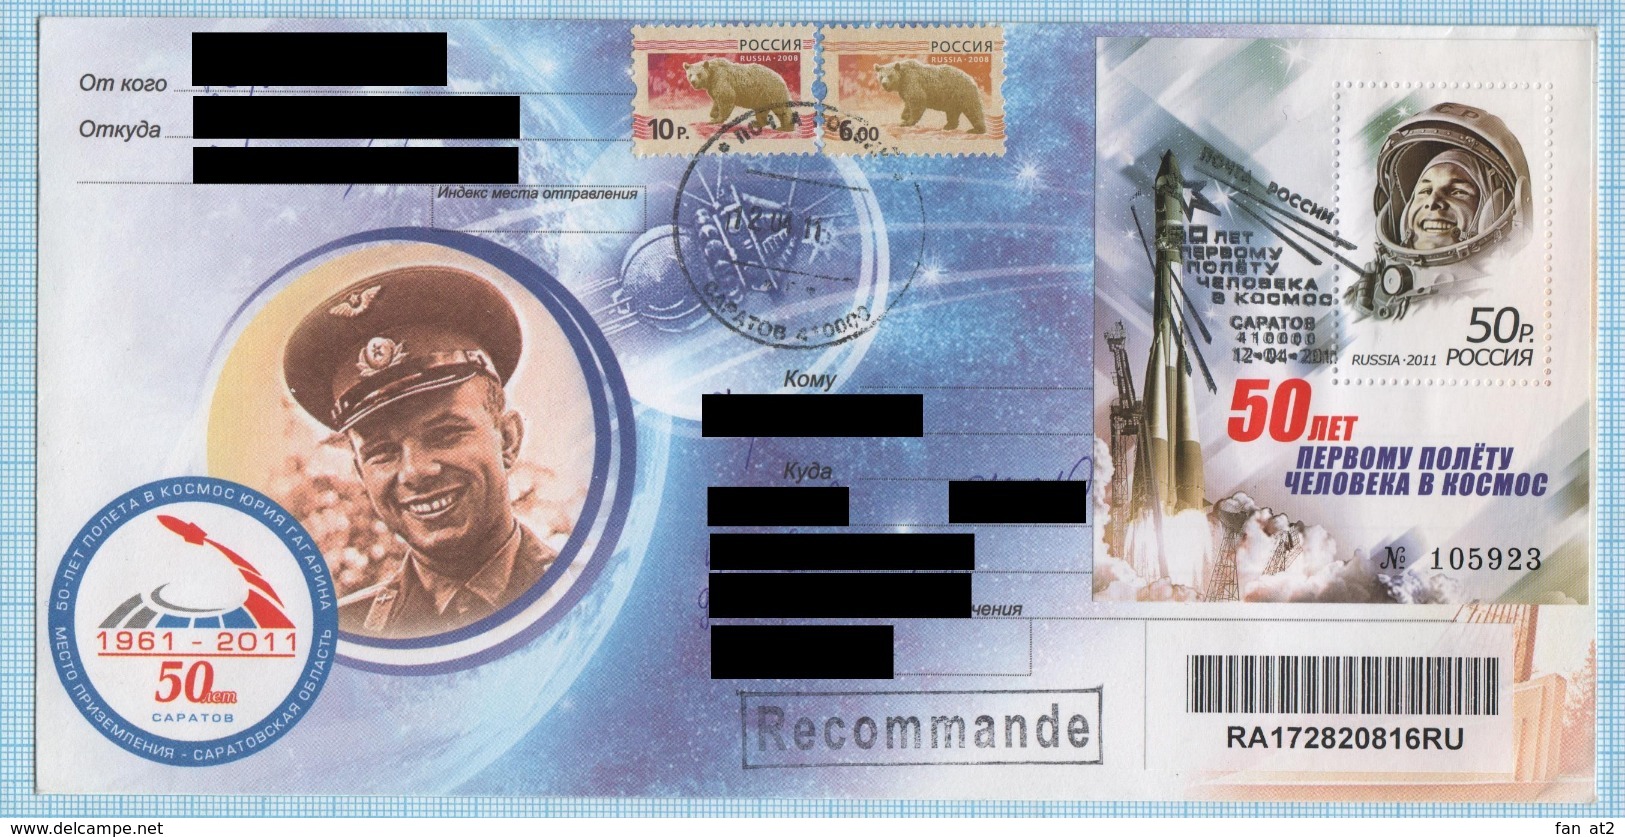 RUSSIA / Postal Envelope / Saratov . 50 Years Of The First Manned Flight Into Space Gagarin. Kyiv. UKRAINE 2011 - Russia